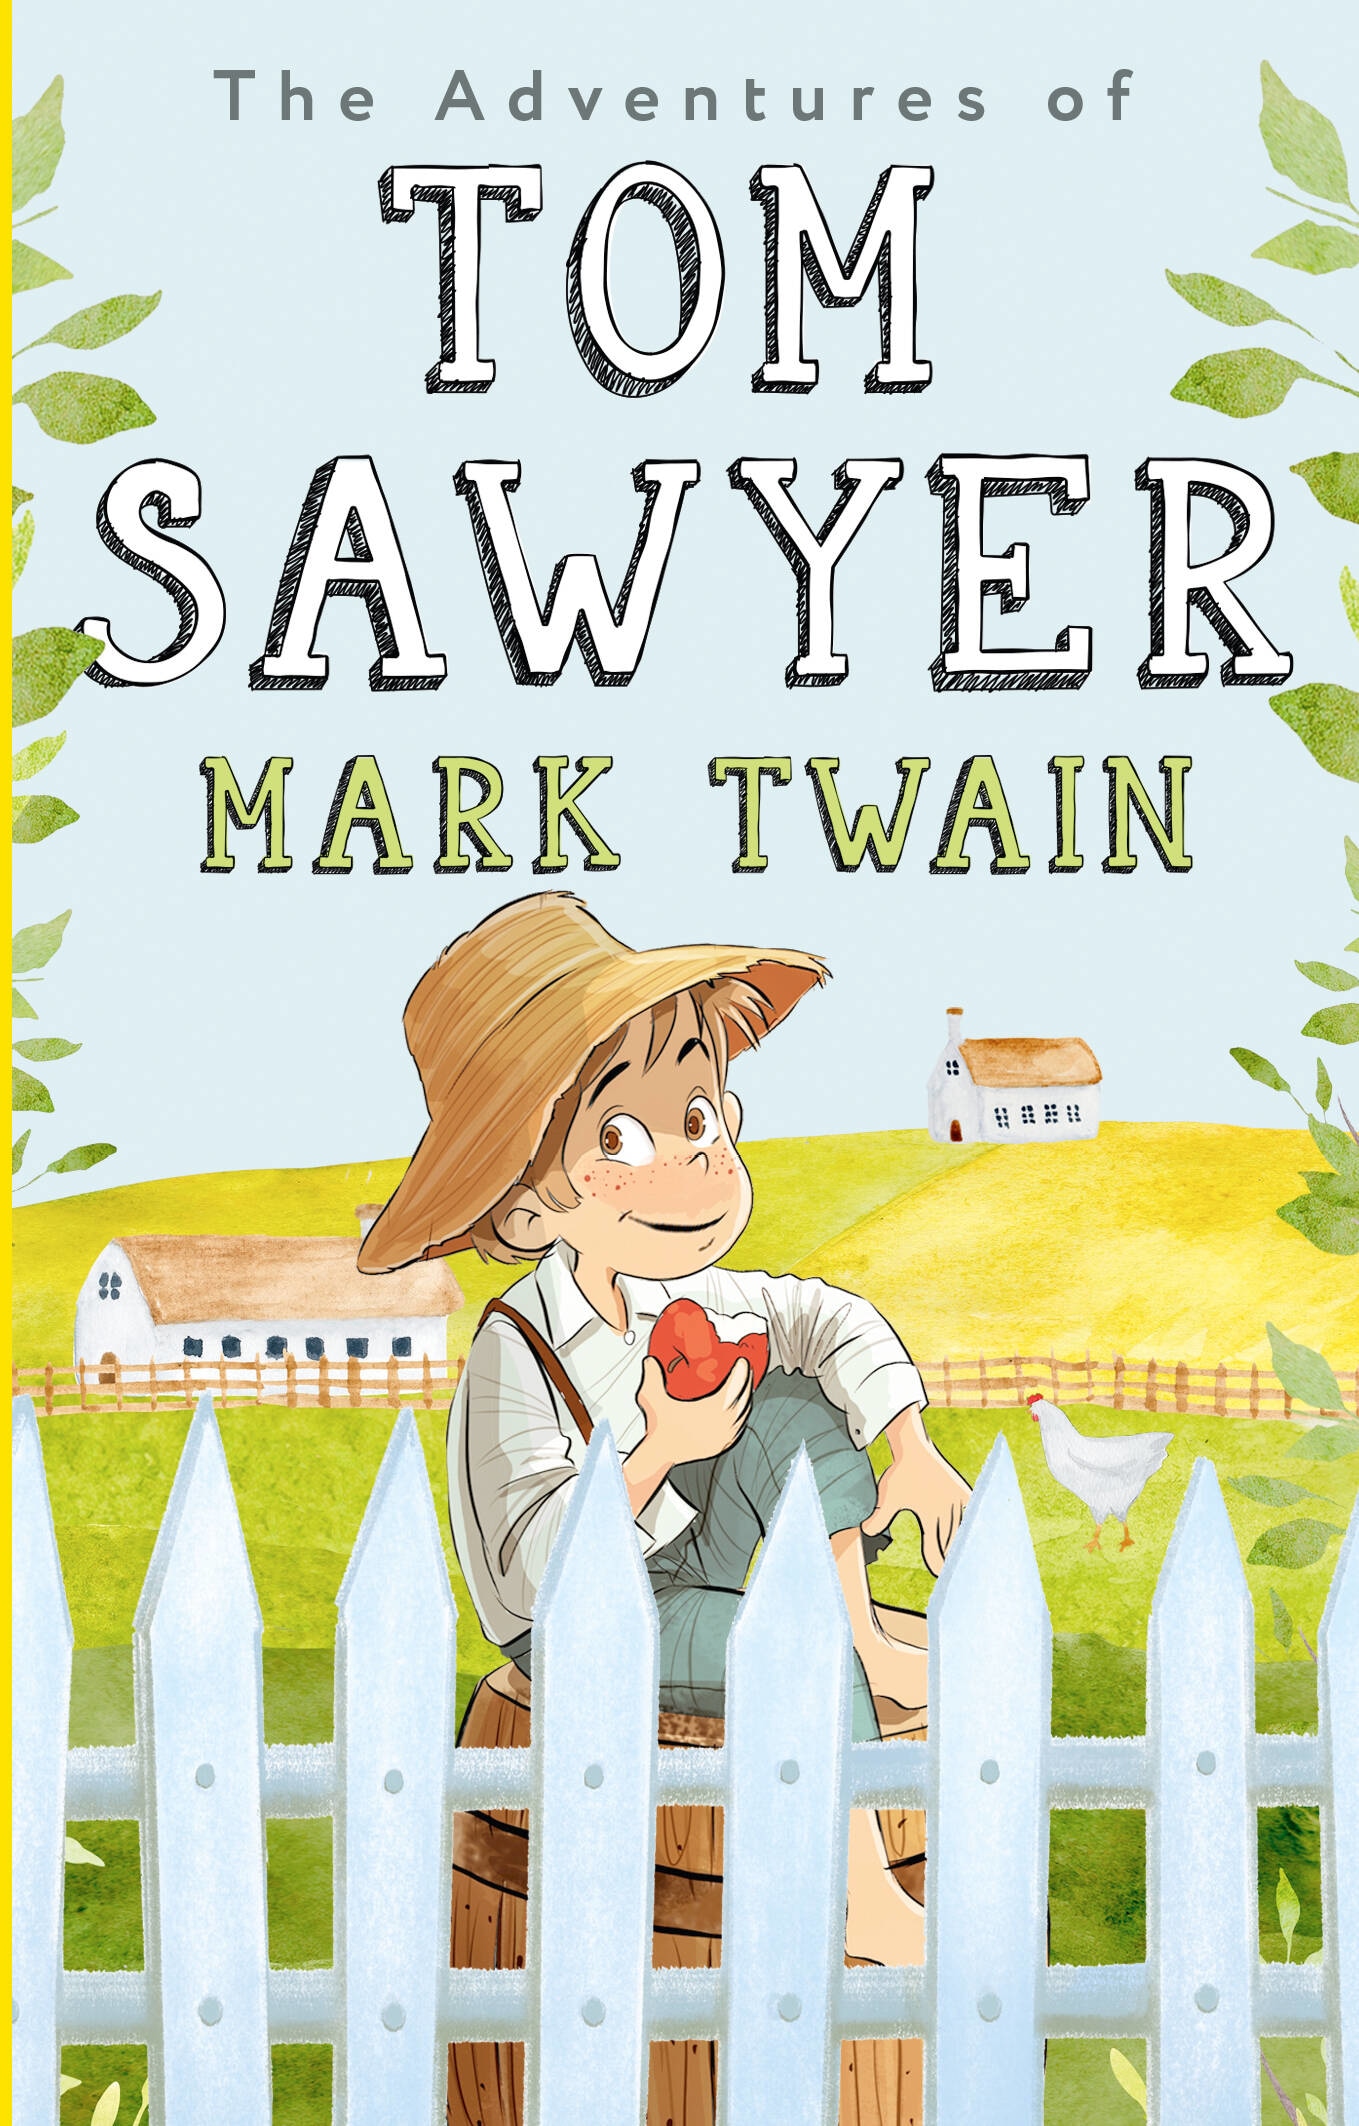 Book “The Adventures of Tom Sawyer” by Марк Твен — 2023